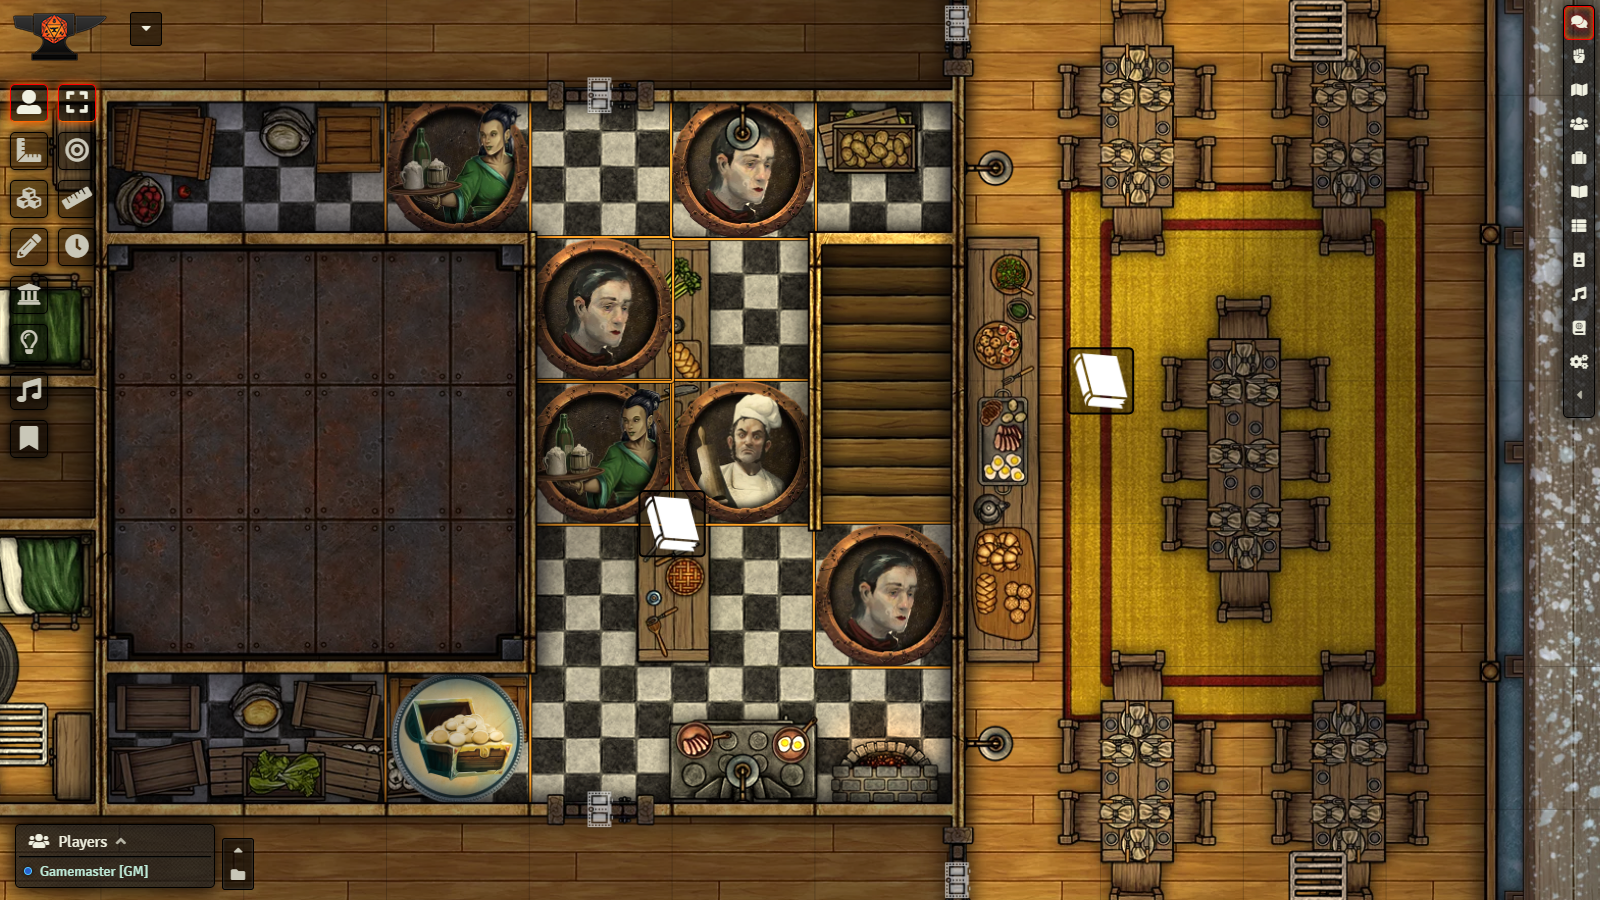 A screenshot showcasing an overhead battle map of a kitchen and dining room, including tokens for a cook and various kitchen staff.